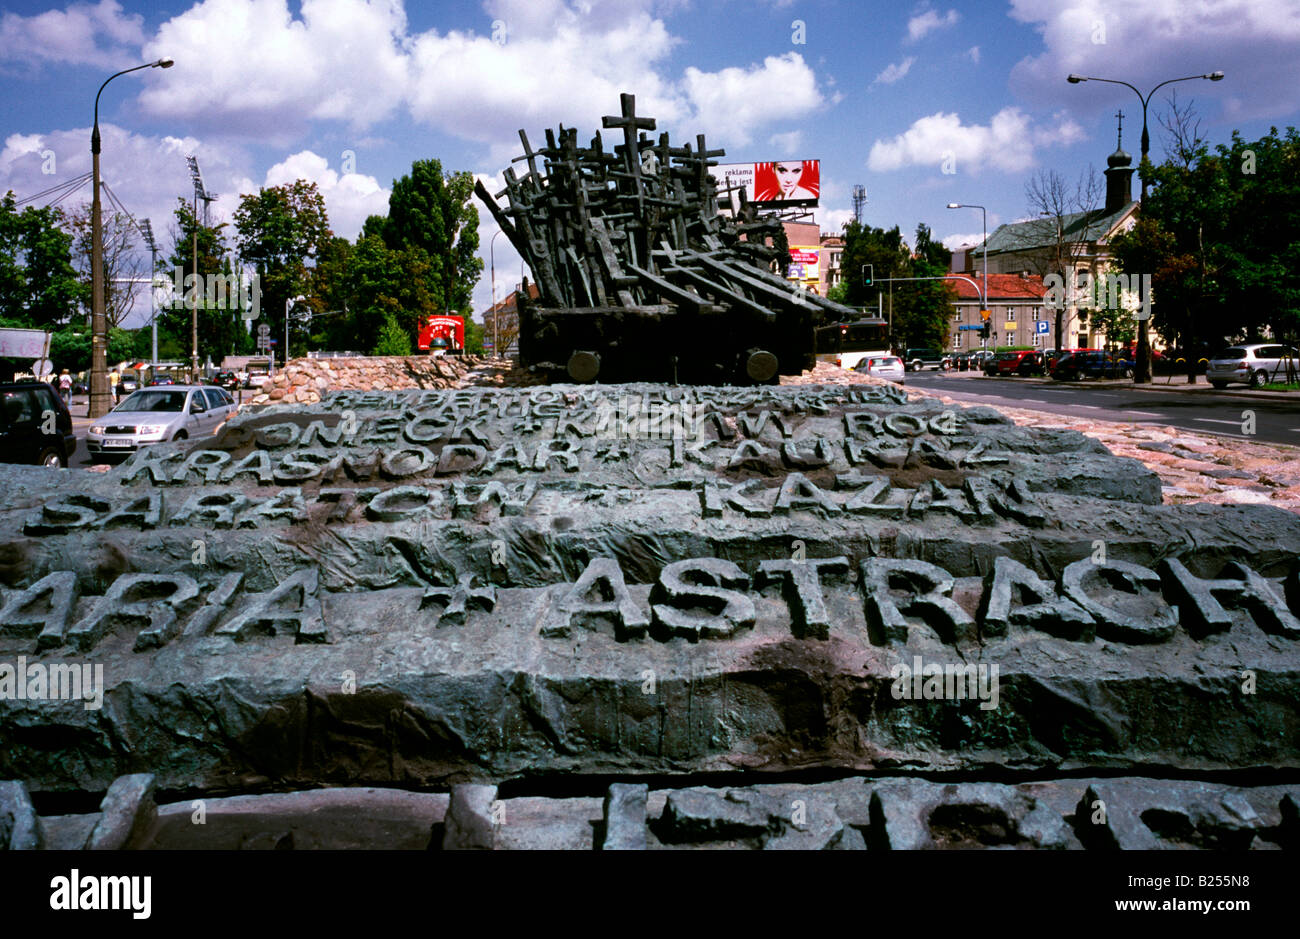 July 10, 2008 - Monument to the victims of the Soviet invasion of Poland on Sept 17, 1939 in the Polish capital of Warsaw. Stock Photo